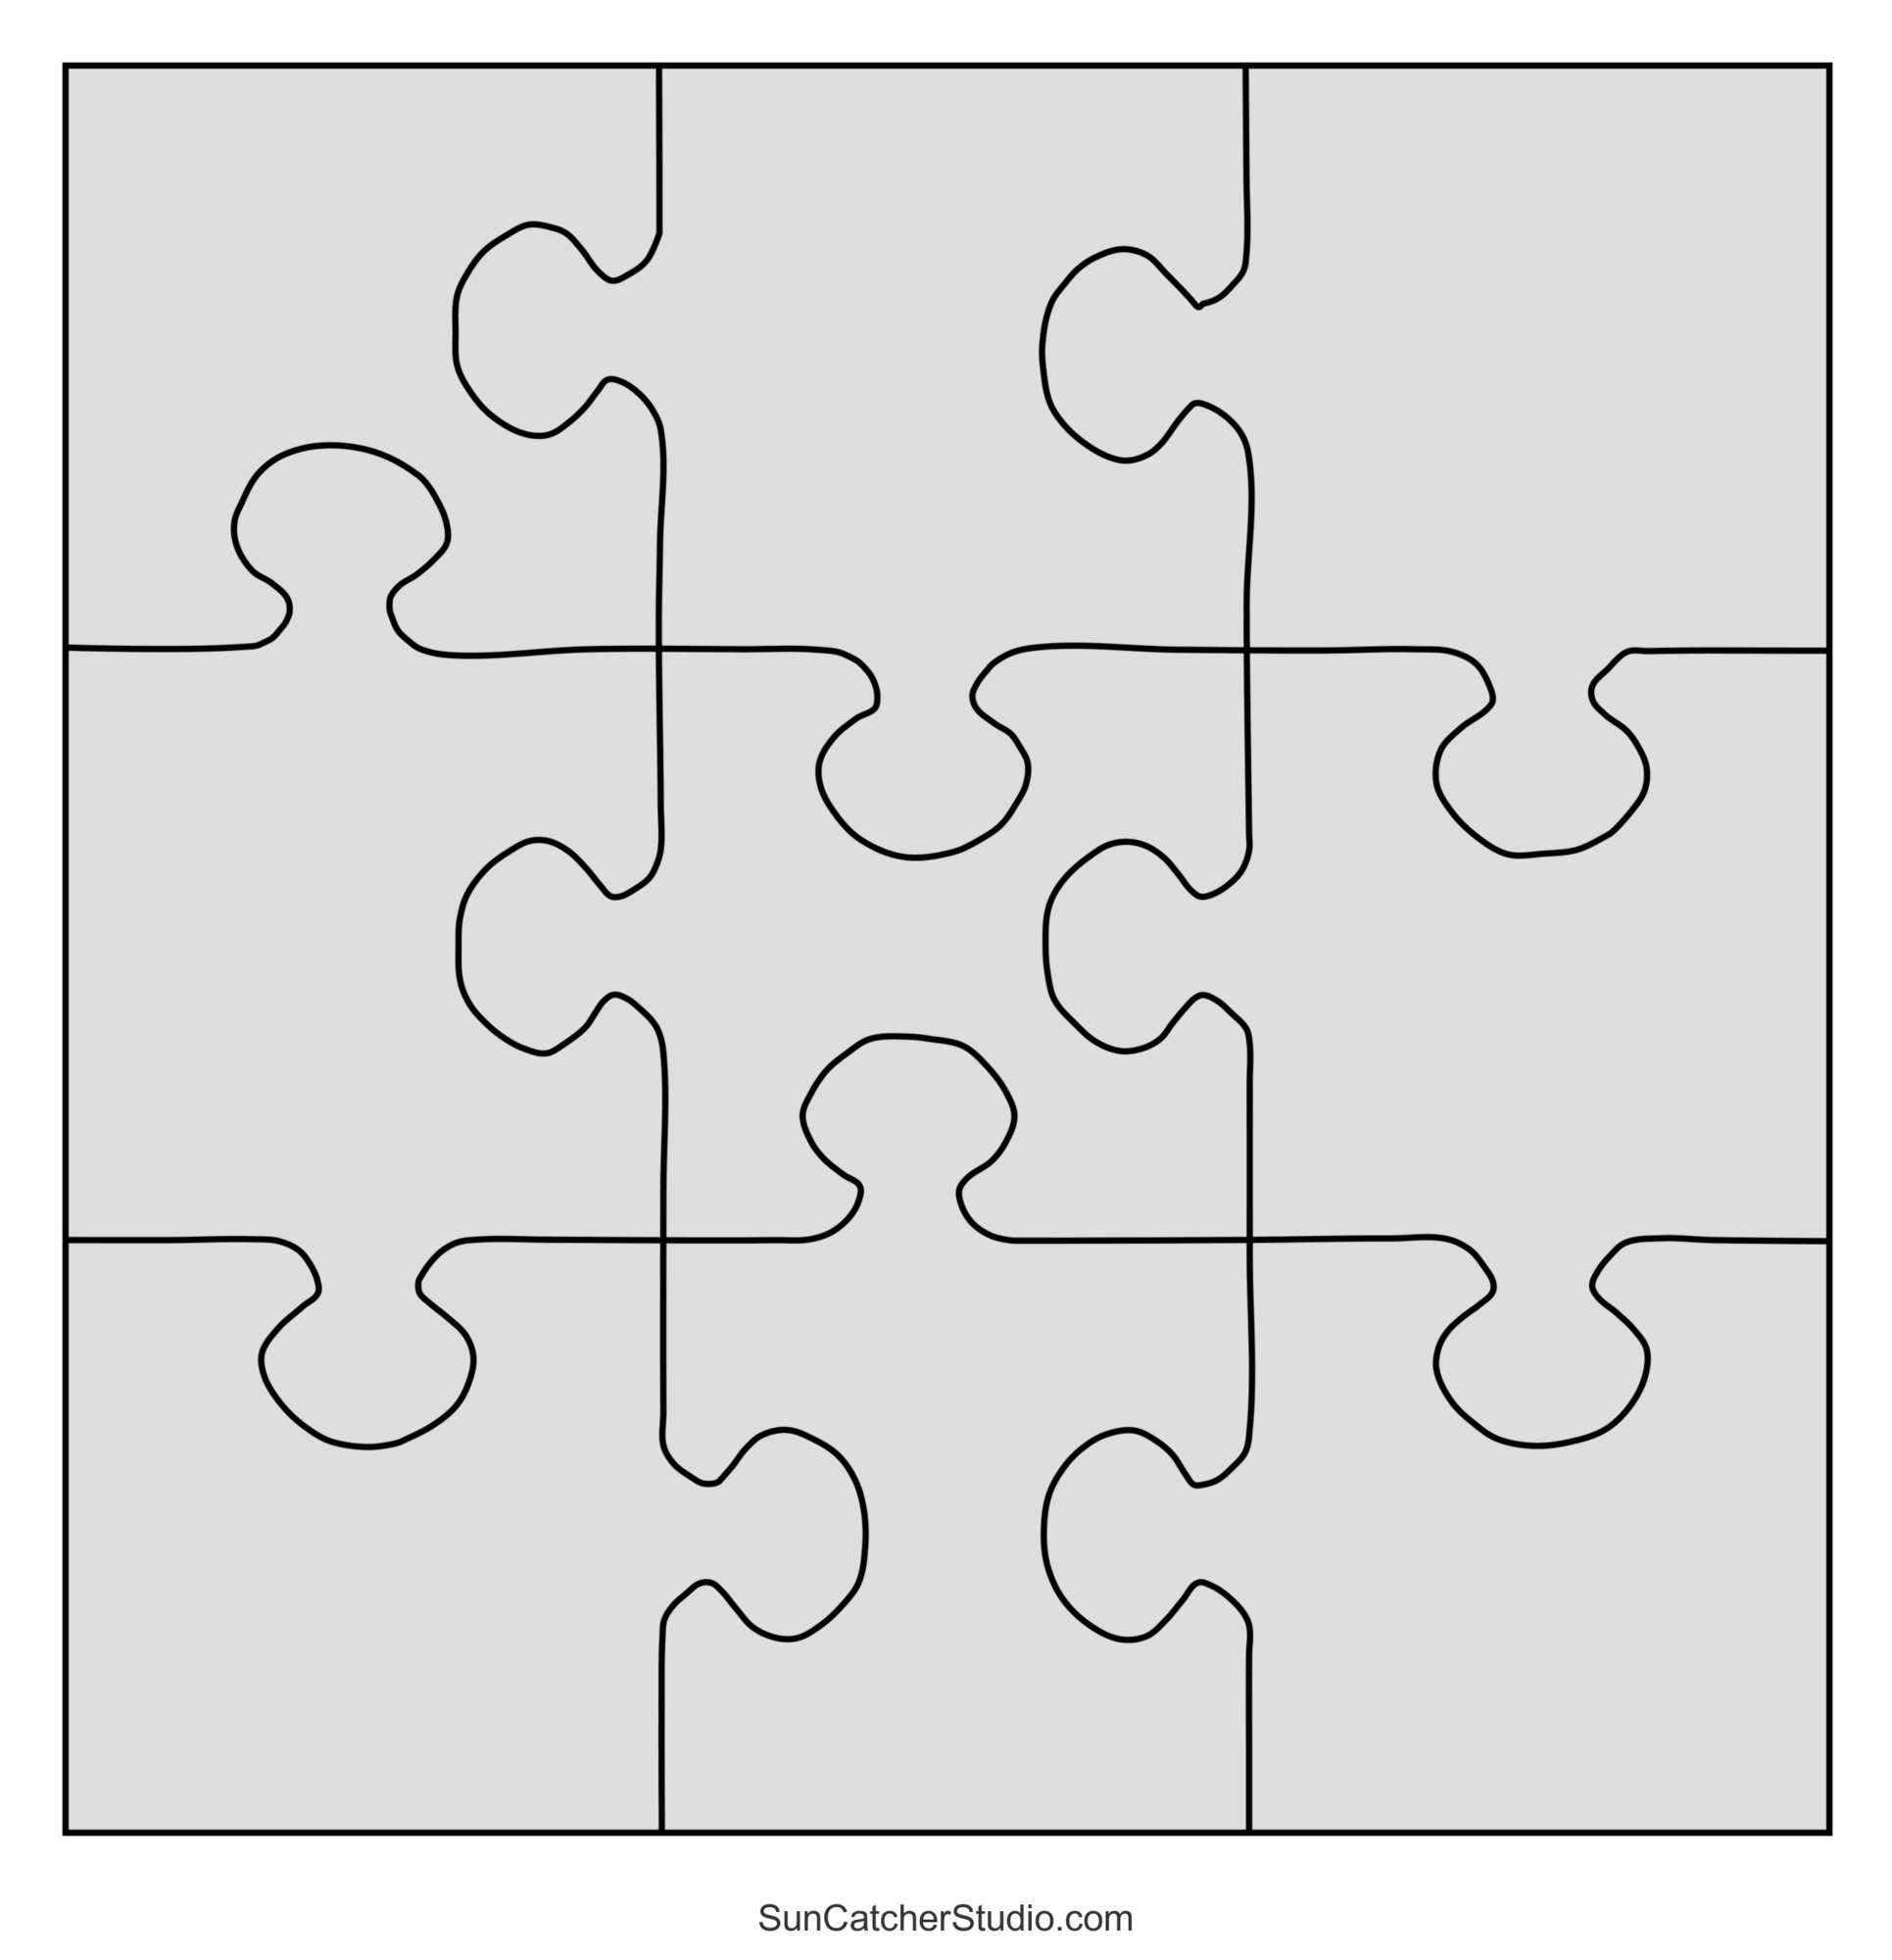 Blank Jigsaw Puzzle Templates, Make Your Own Jigsaw Puzzle for Free –  Tim's Printables